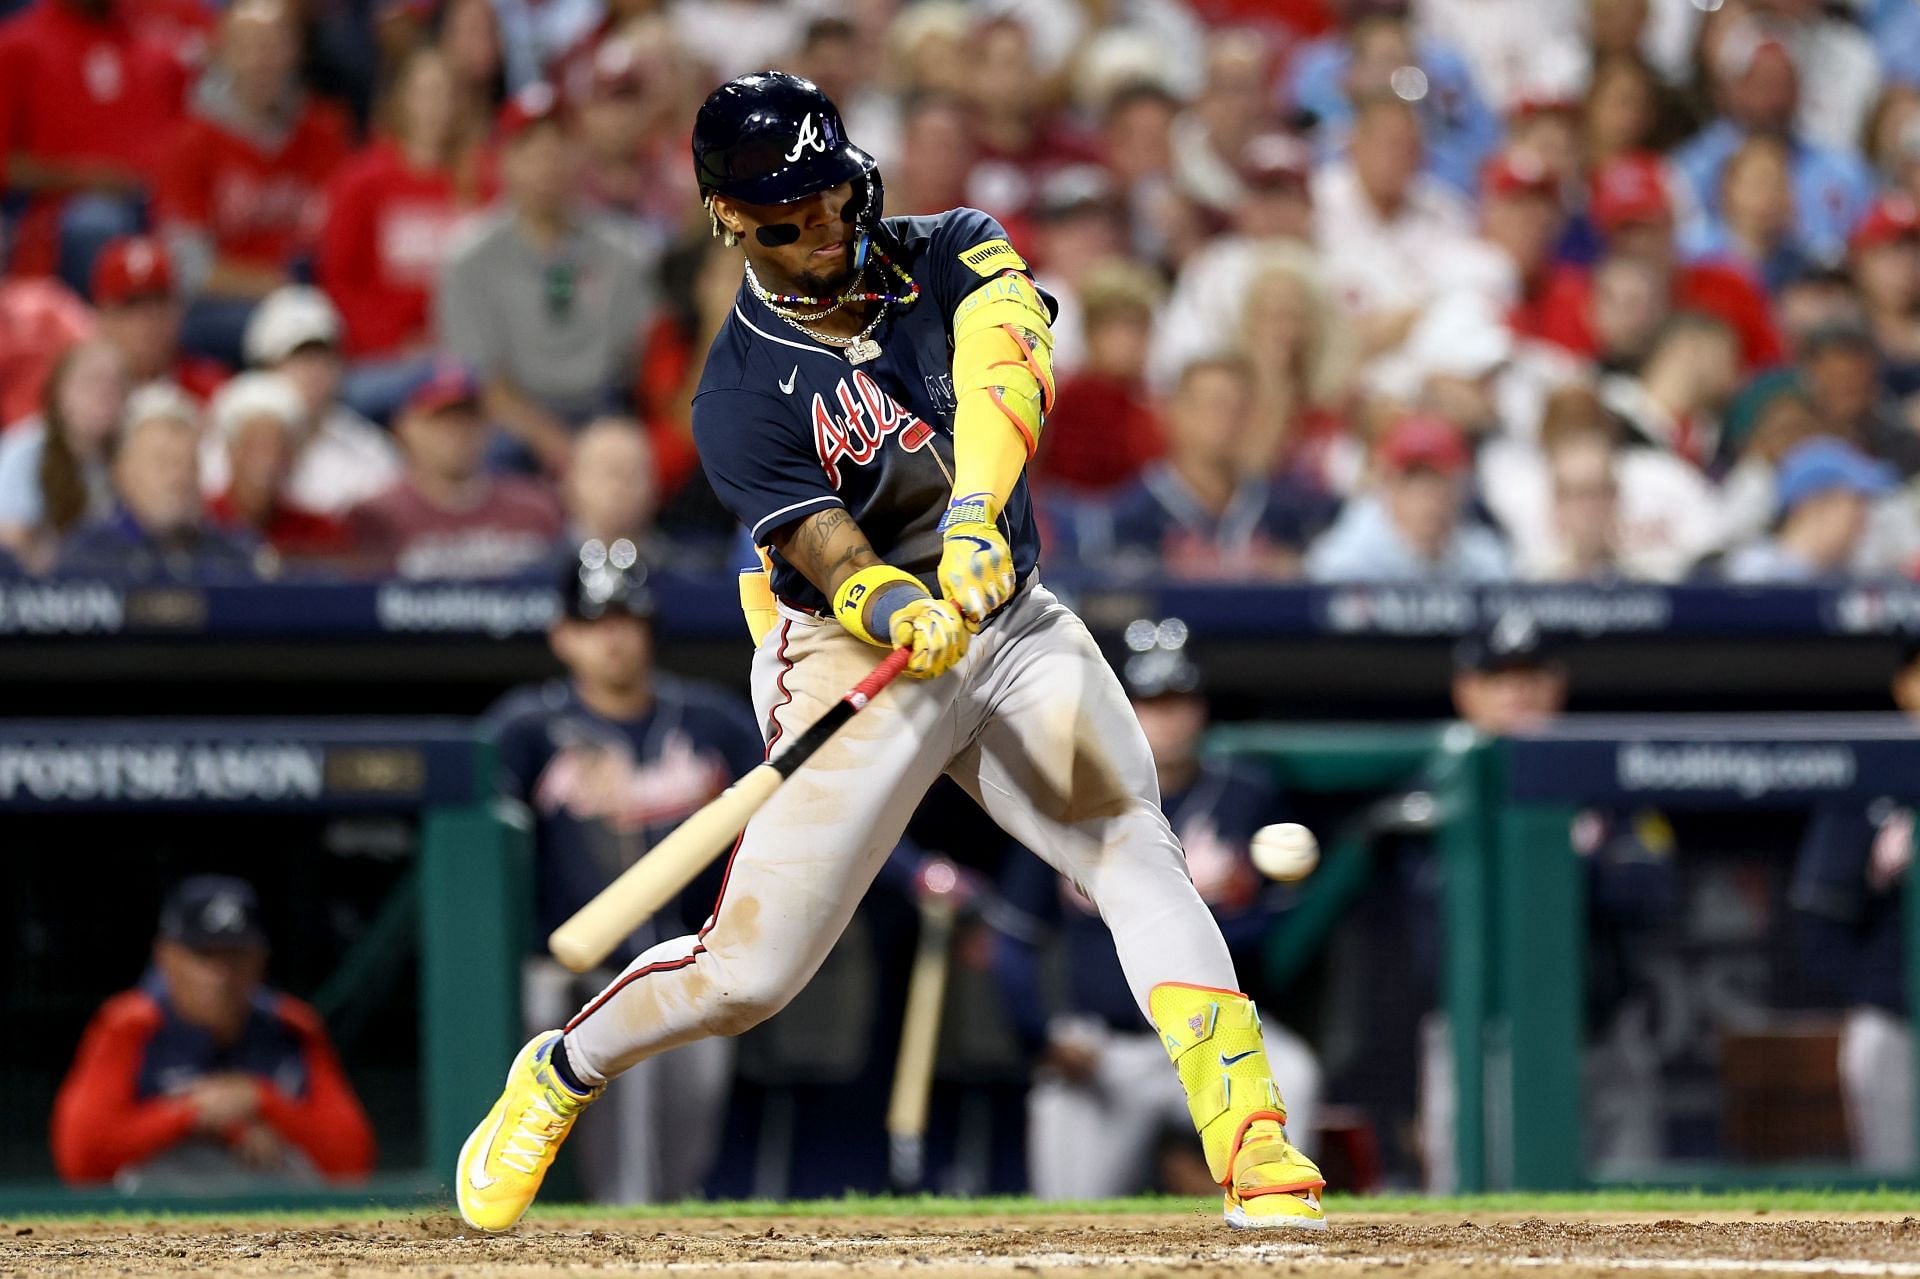  Ronald Acu&ntilde;a Jr. #13 of the Atlanta Braves hits a single against the Philadelphia Phillies during the fifth inning in Game Three of the Division Series at Citizens Bank Park 